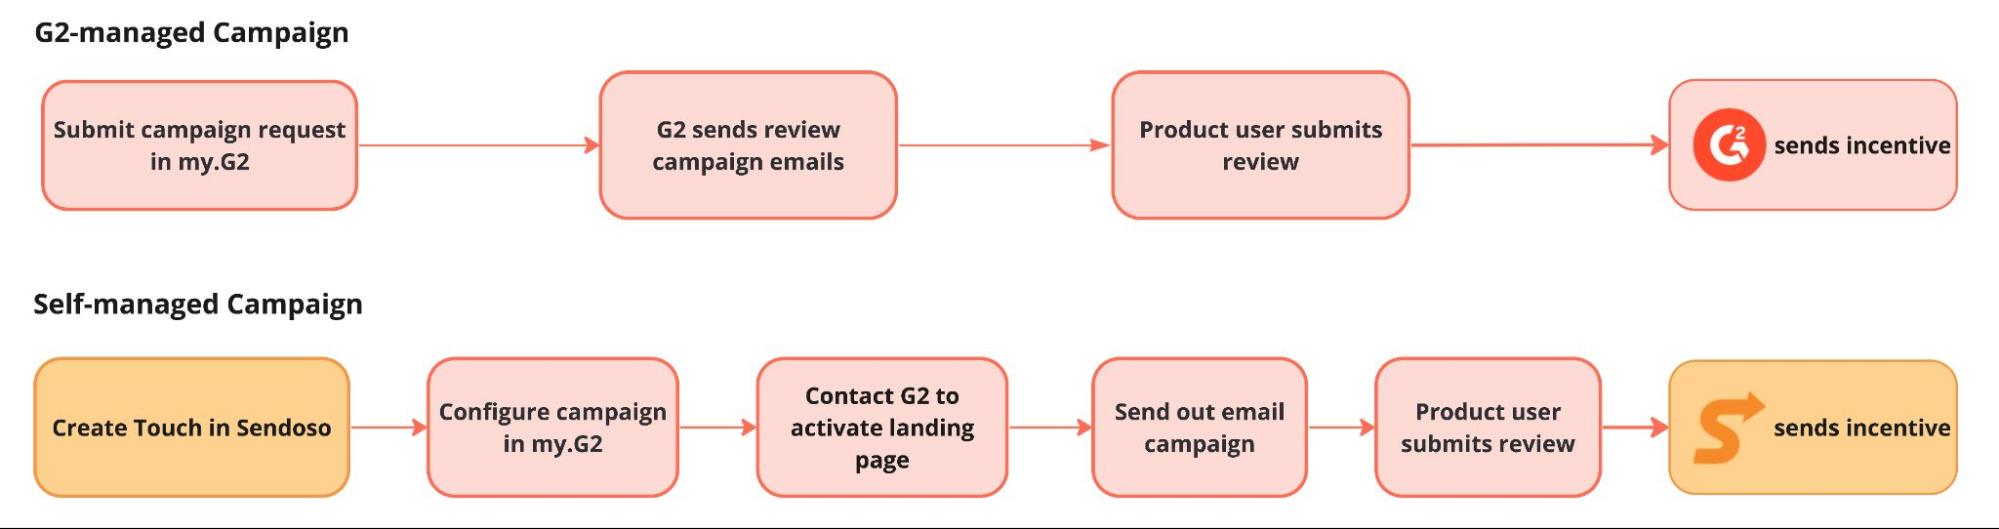 image showing the steps for a self-managed review campaign